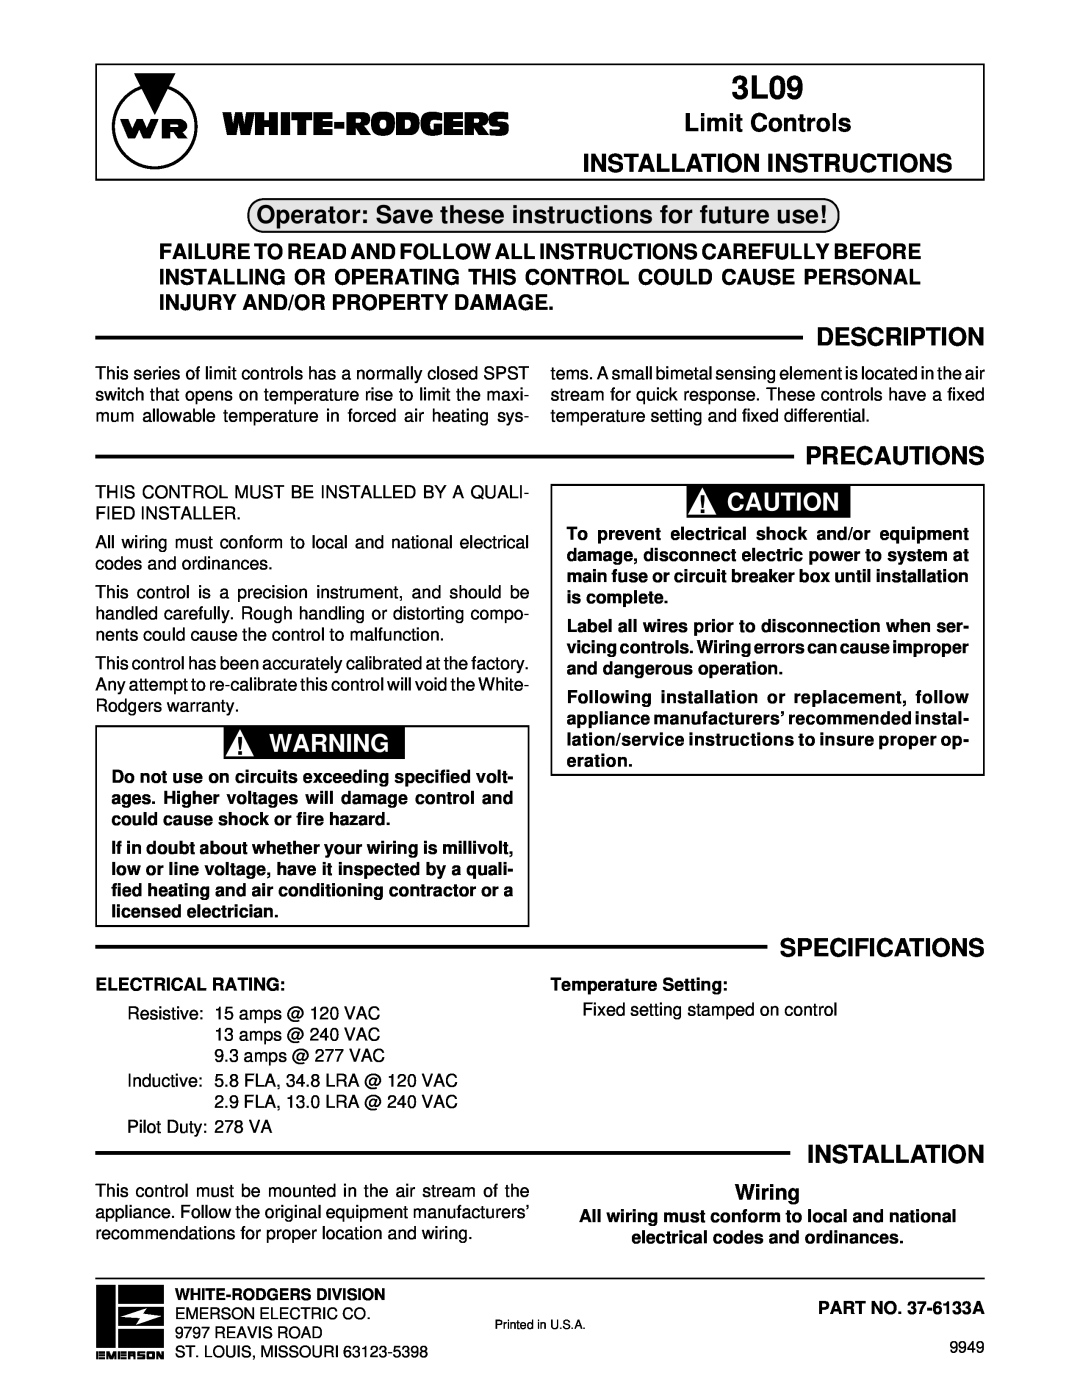 White Rodgers 3L09 specifications White-Rodgers, Operator Save these instructions for future use, Description, Precautions 